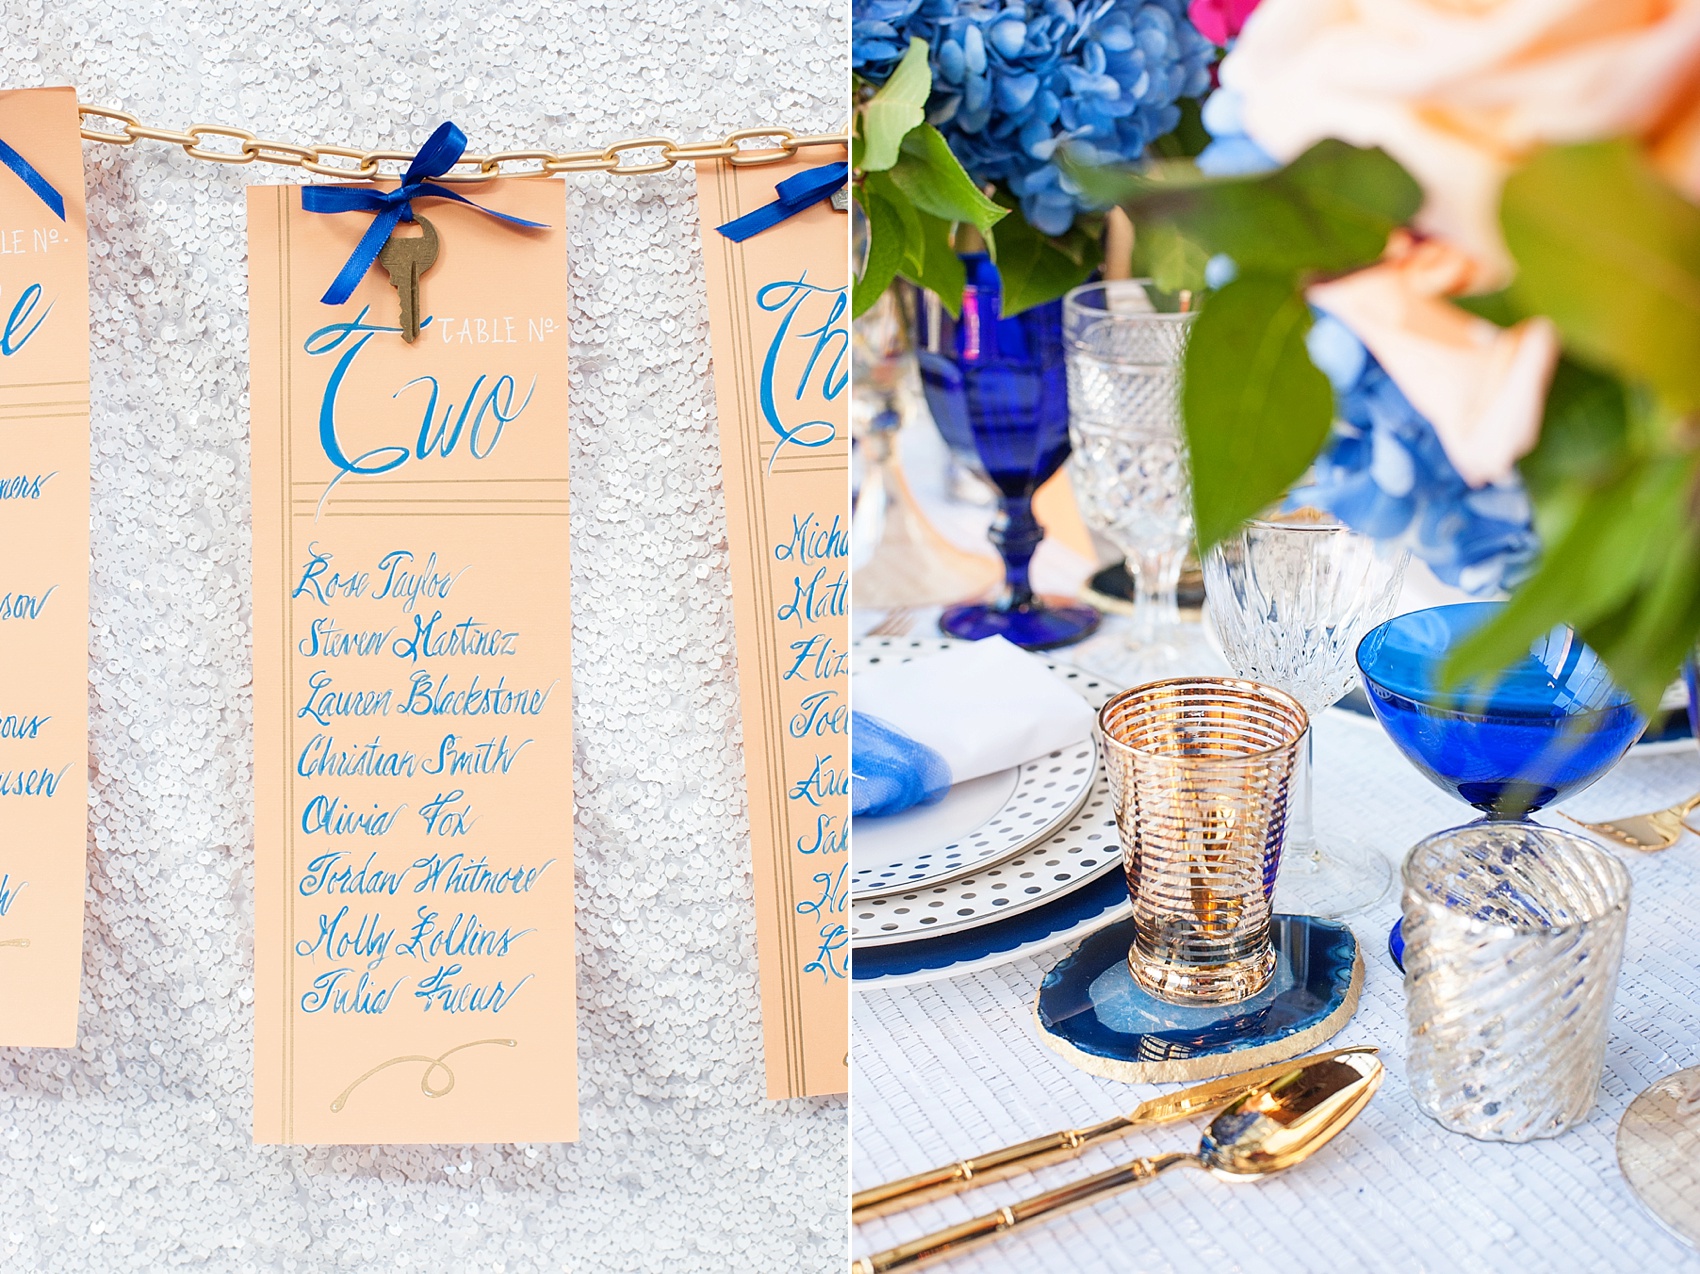 Hand lettering escort cards for Lock and Key, Forever Linked, Ponts des Art wedding inspiration. Photos by Mikkel Paige Photography, planning by Dulce Dream Events. Lettering by Chalk It Up 2 Love.